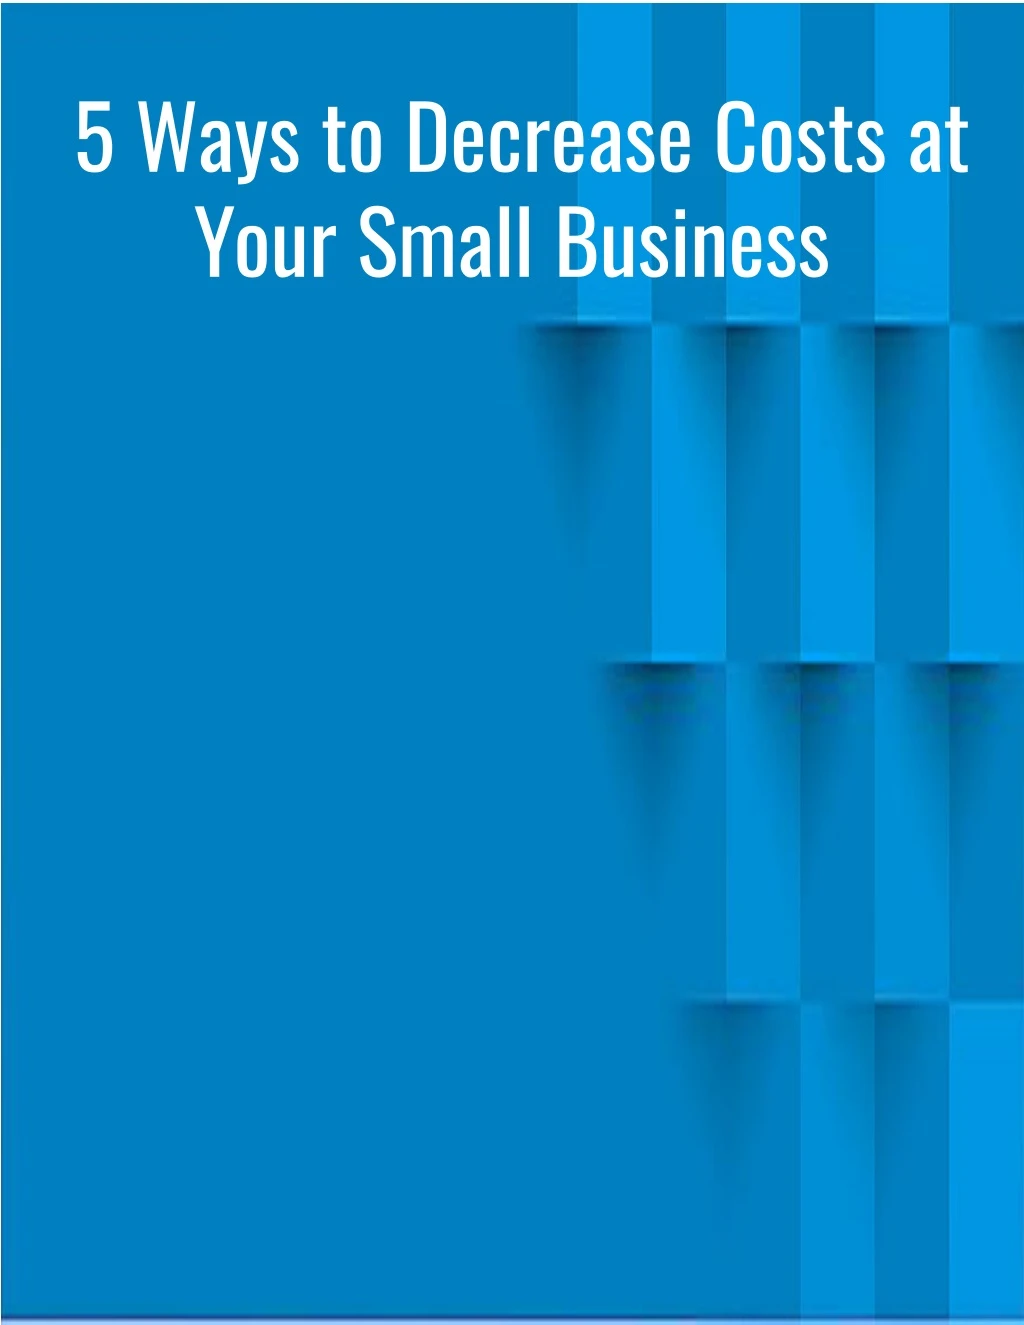 5 ways to decrease costs at your small business